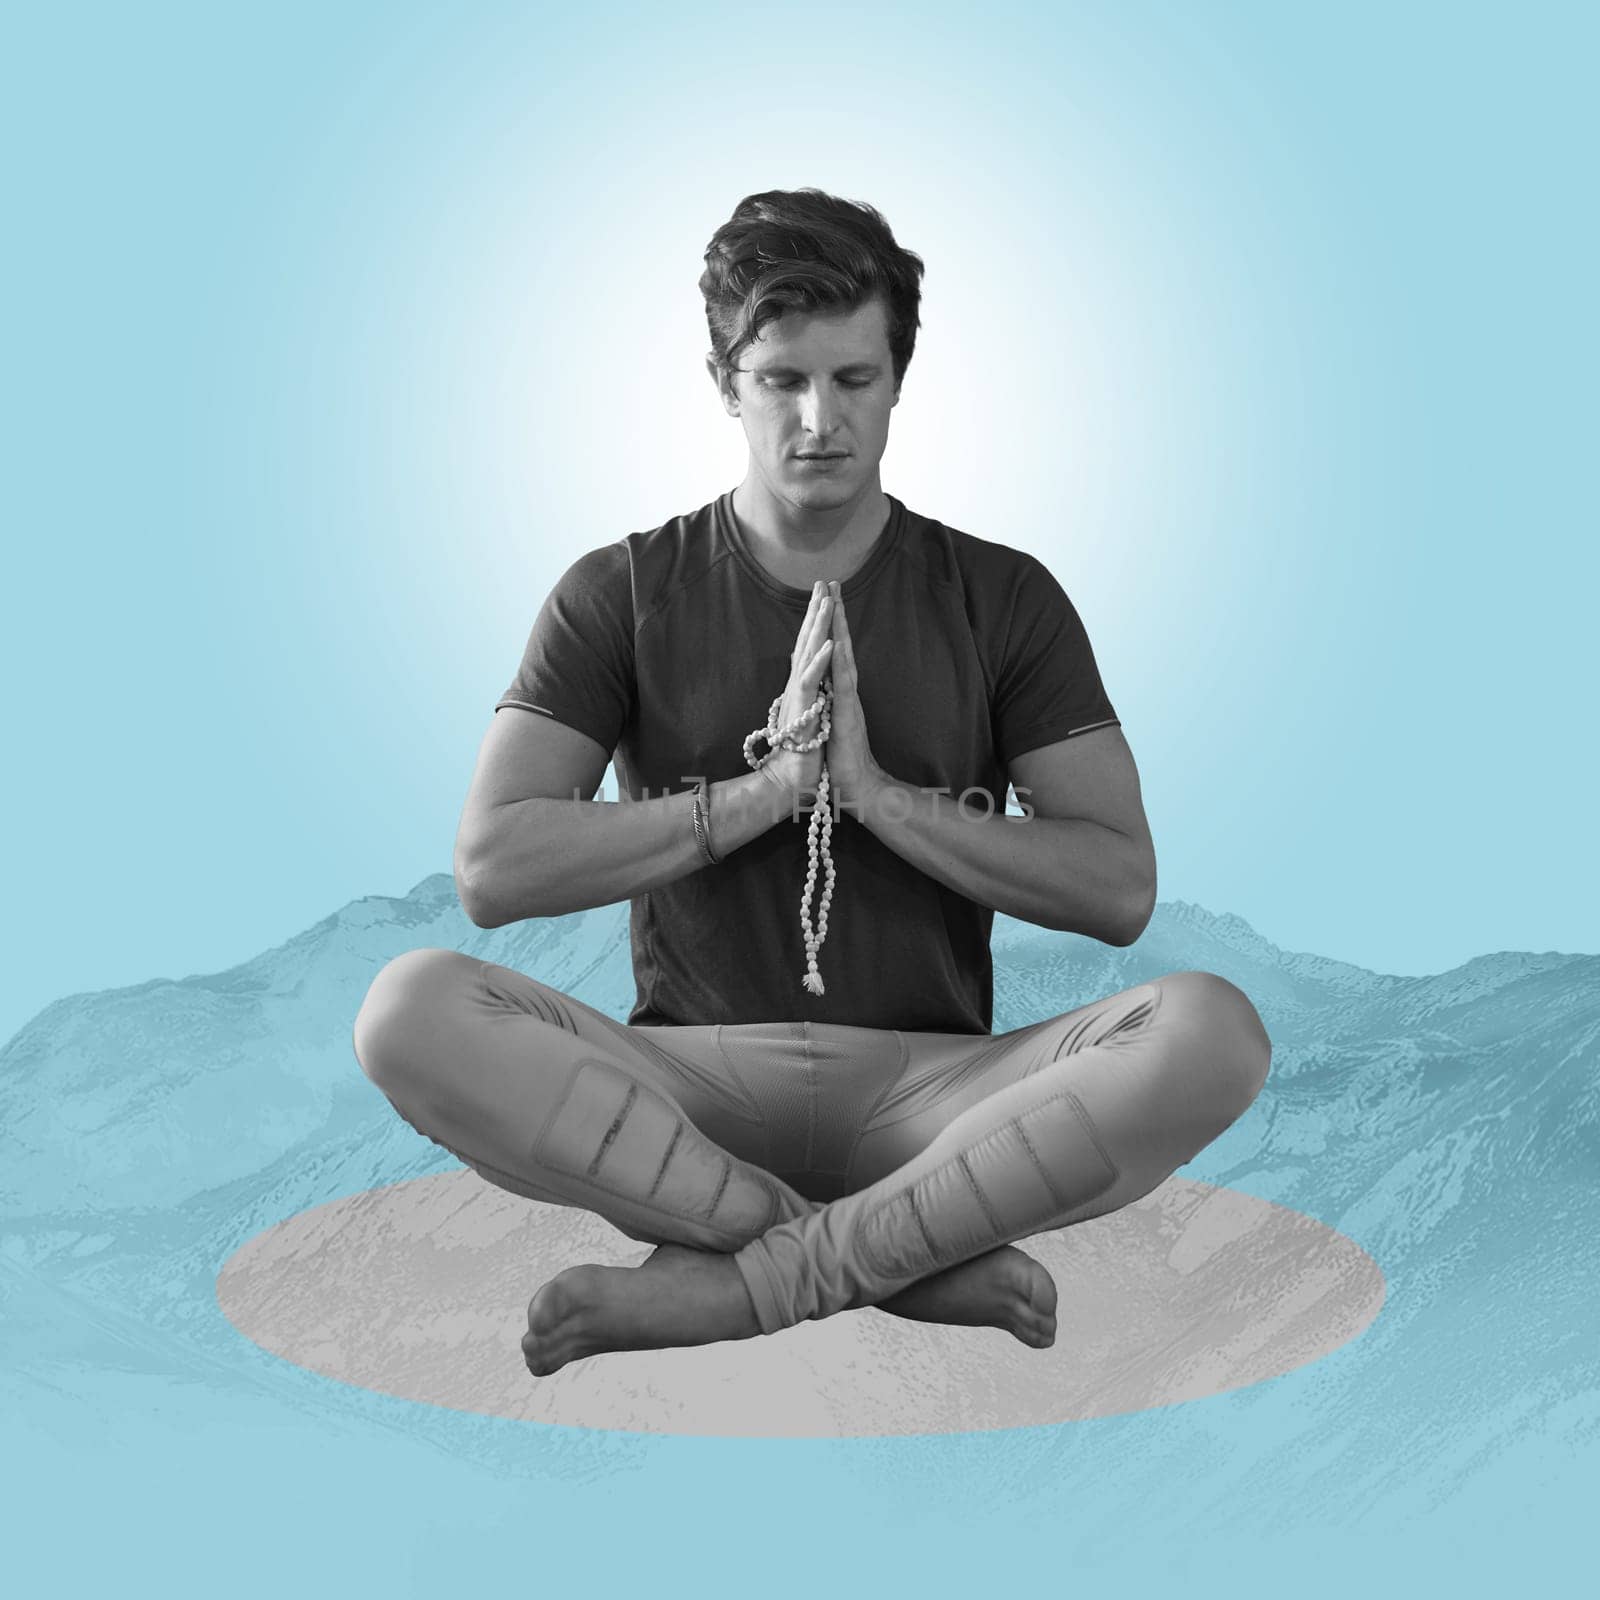 Zen, meditation and man on poster, mountain on blue background and yoga pose in balance. Art, advertising and creative collage design for health, wellness and calm, spiritual lifestyle studio mock up by YuriArcurs